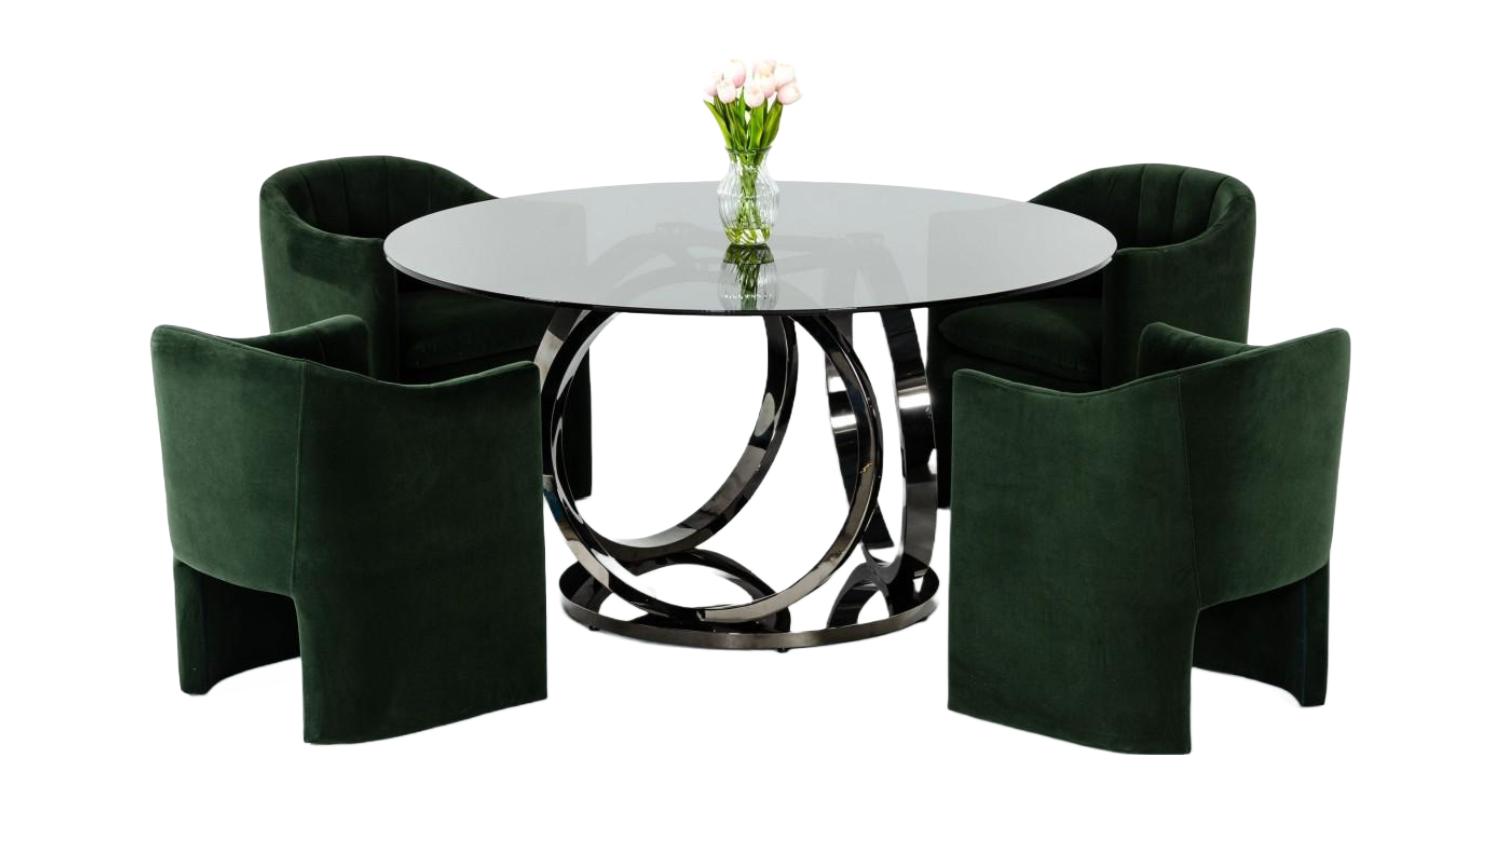 Contemporary, Modern Dining Room Set Enid Danube VGZAT009-DT-5pcs in Green Fabric